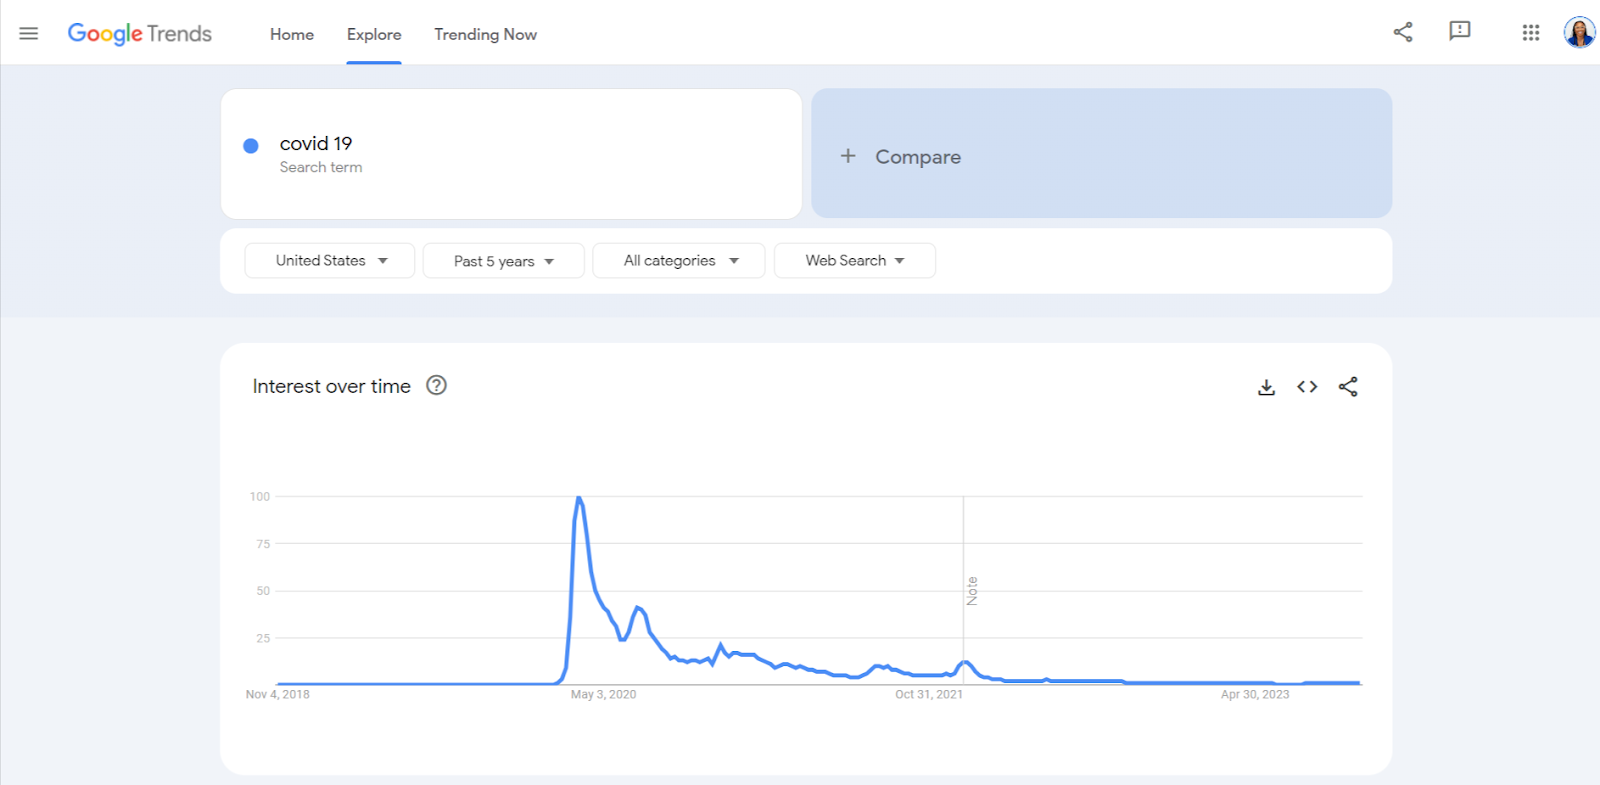  Google Trends graph showing interest over time for Covid 19